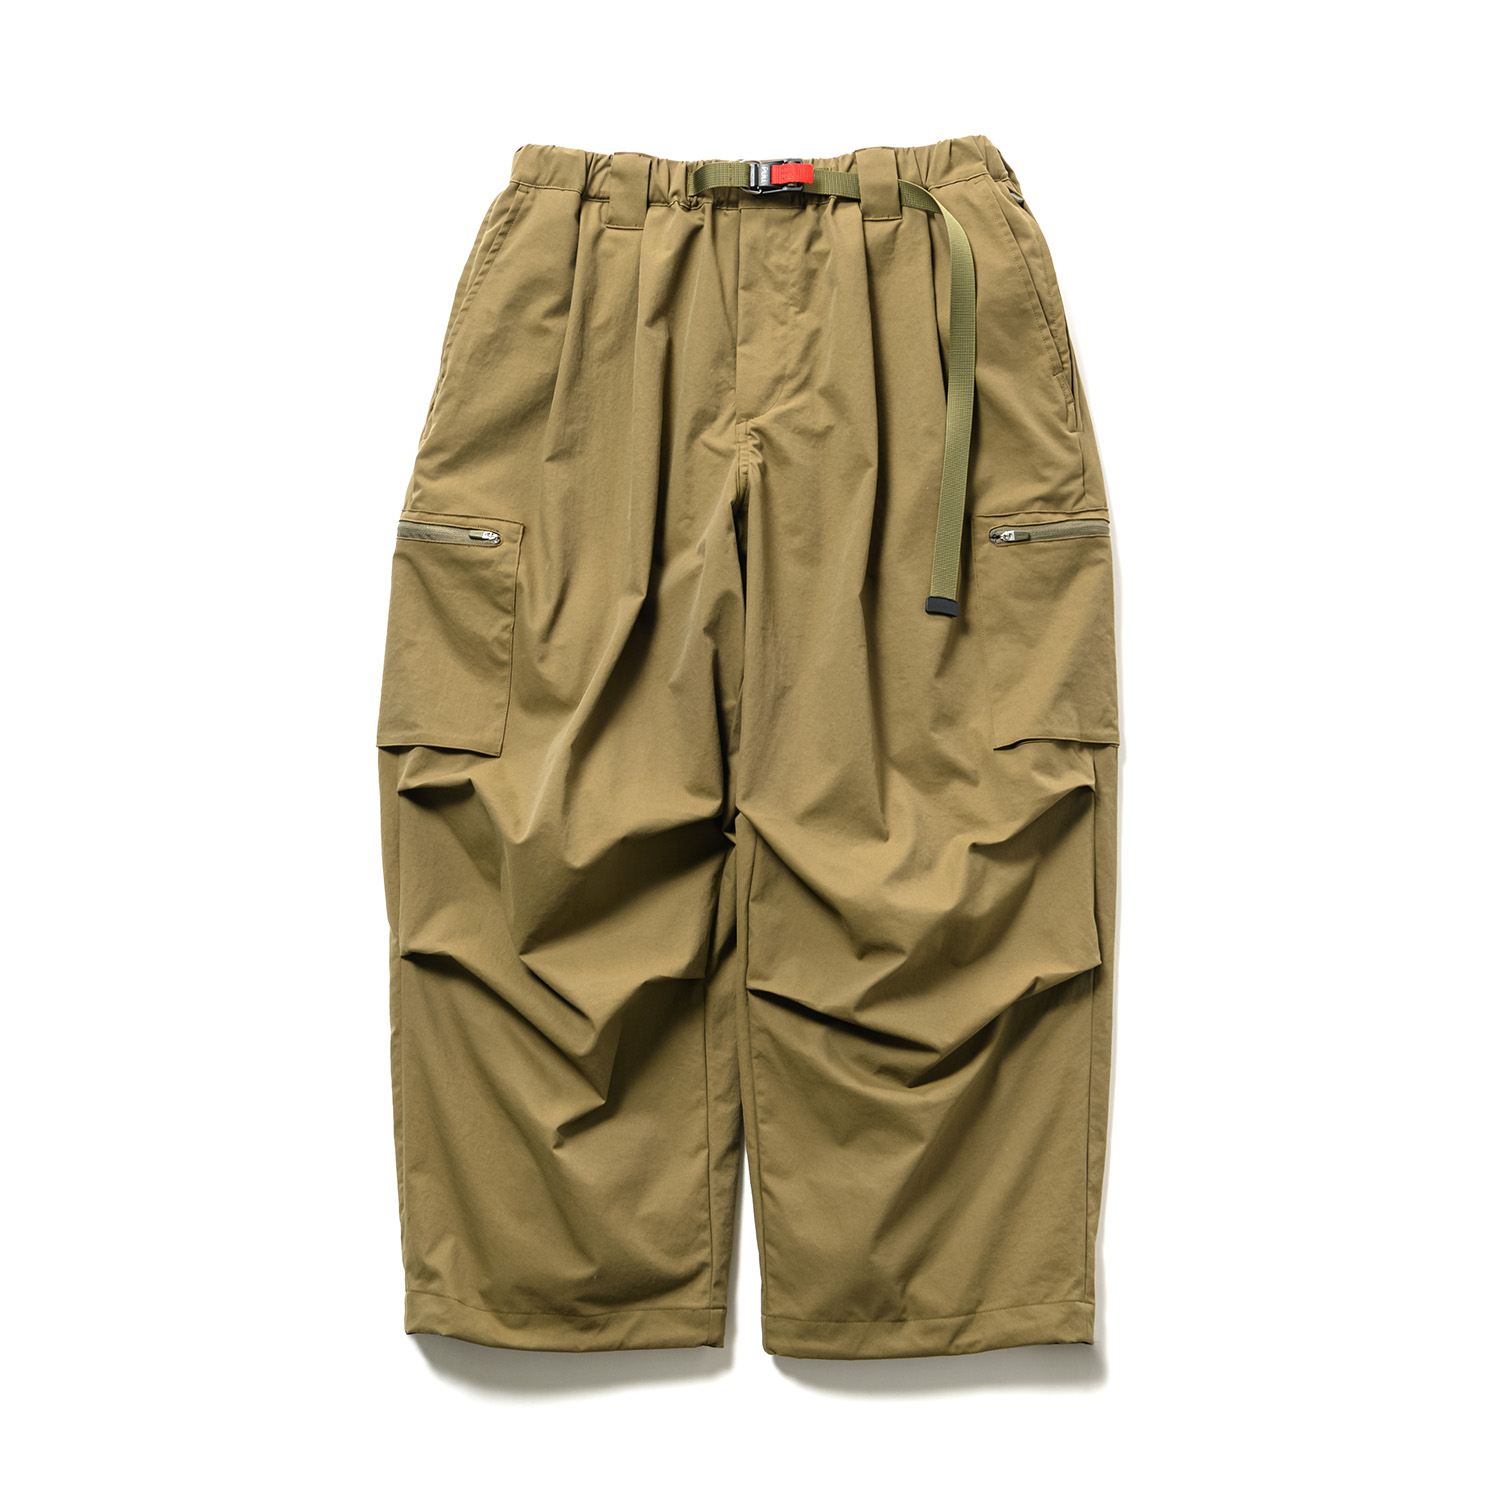 Tightbooth 19SS BAGGY CARGO PANTS Lサイズ